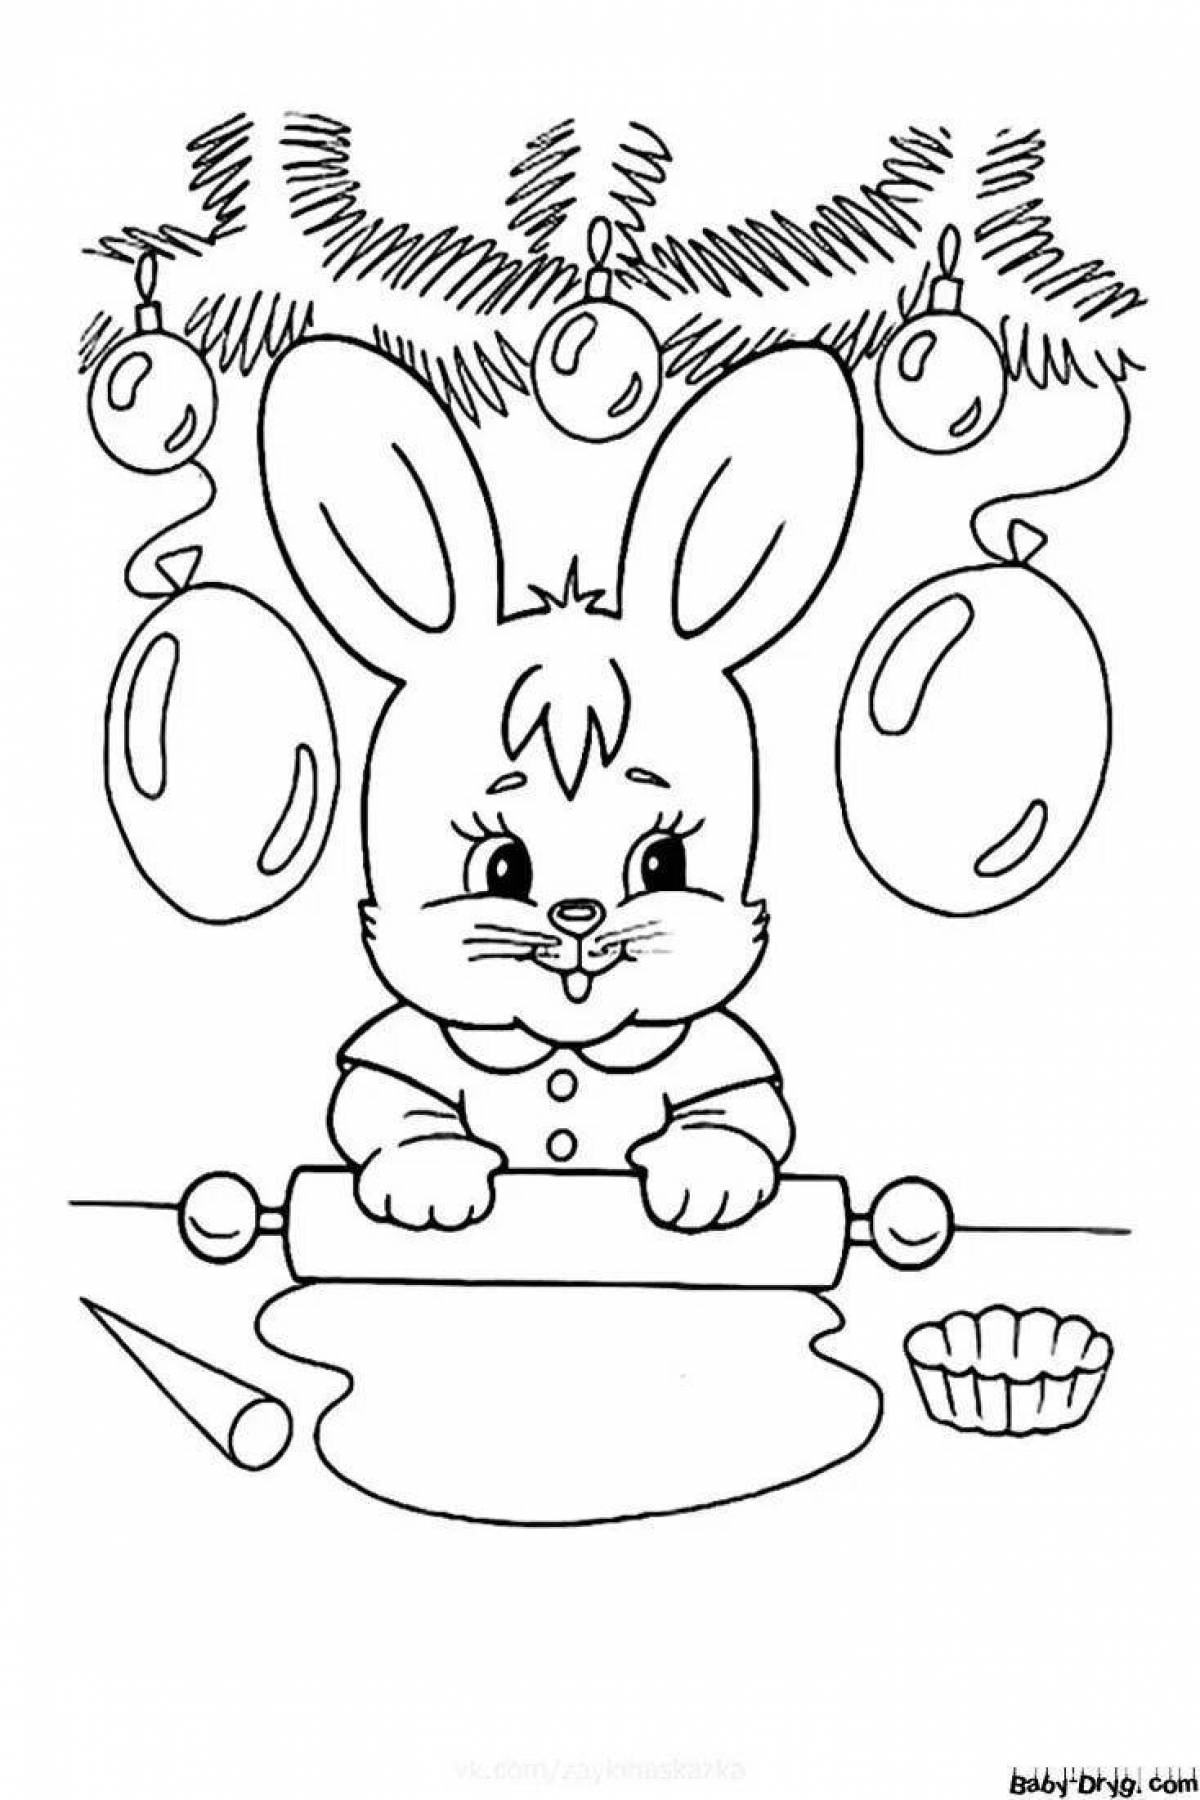 Charming coloring book year of the rabbit 2023